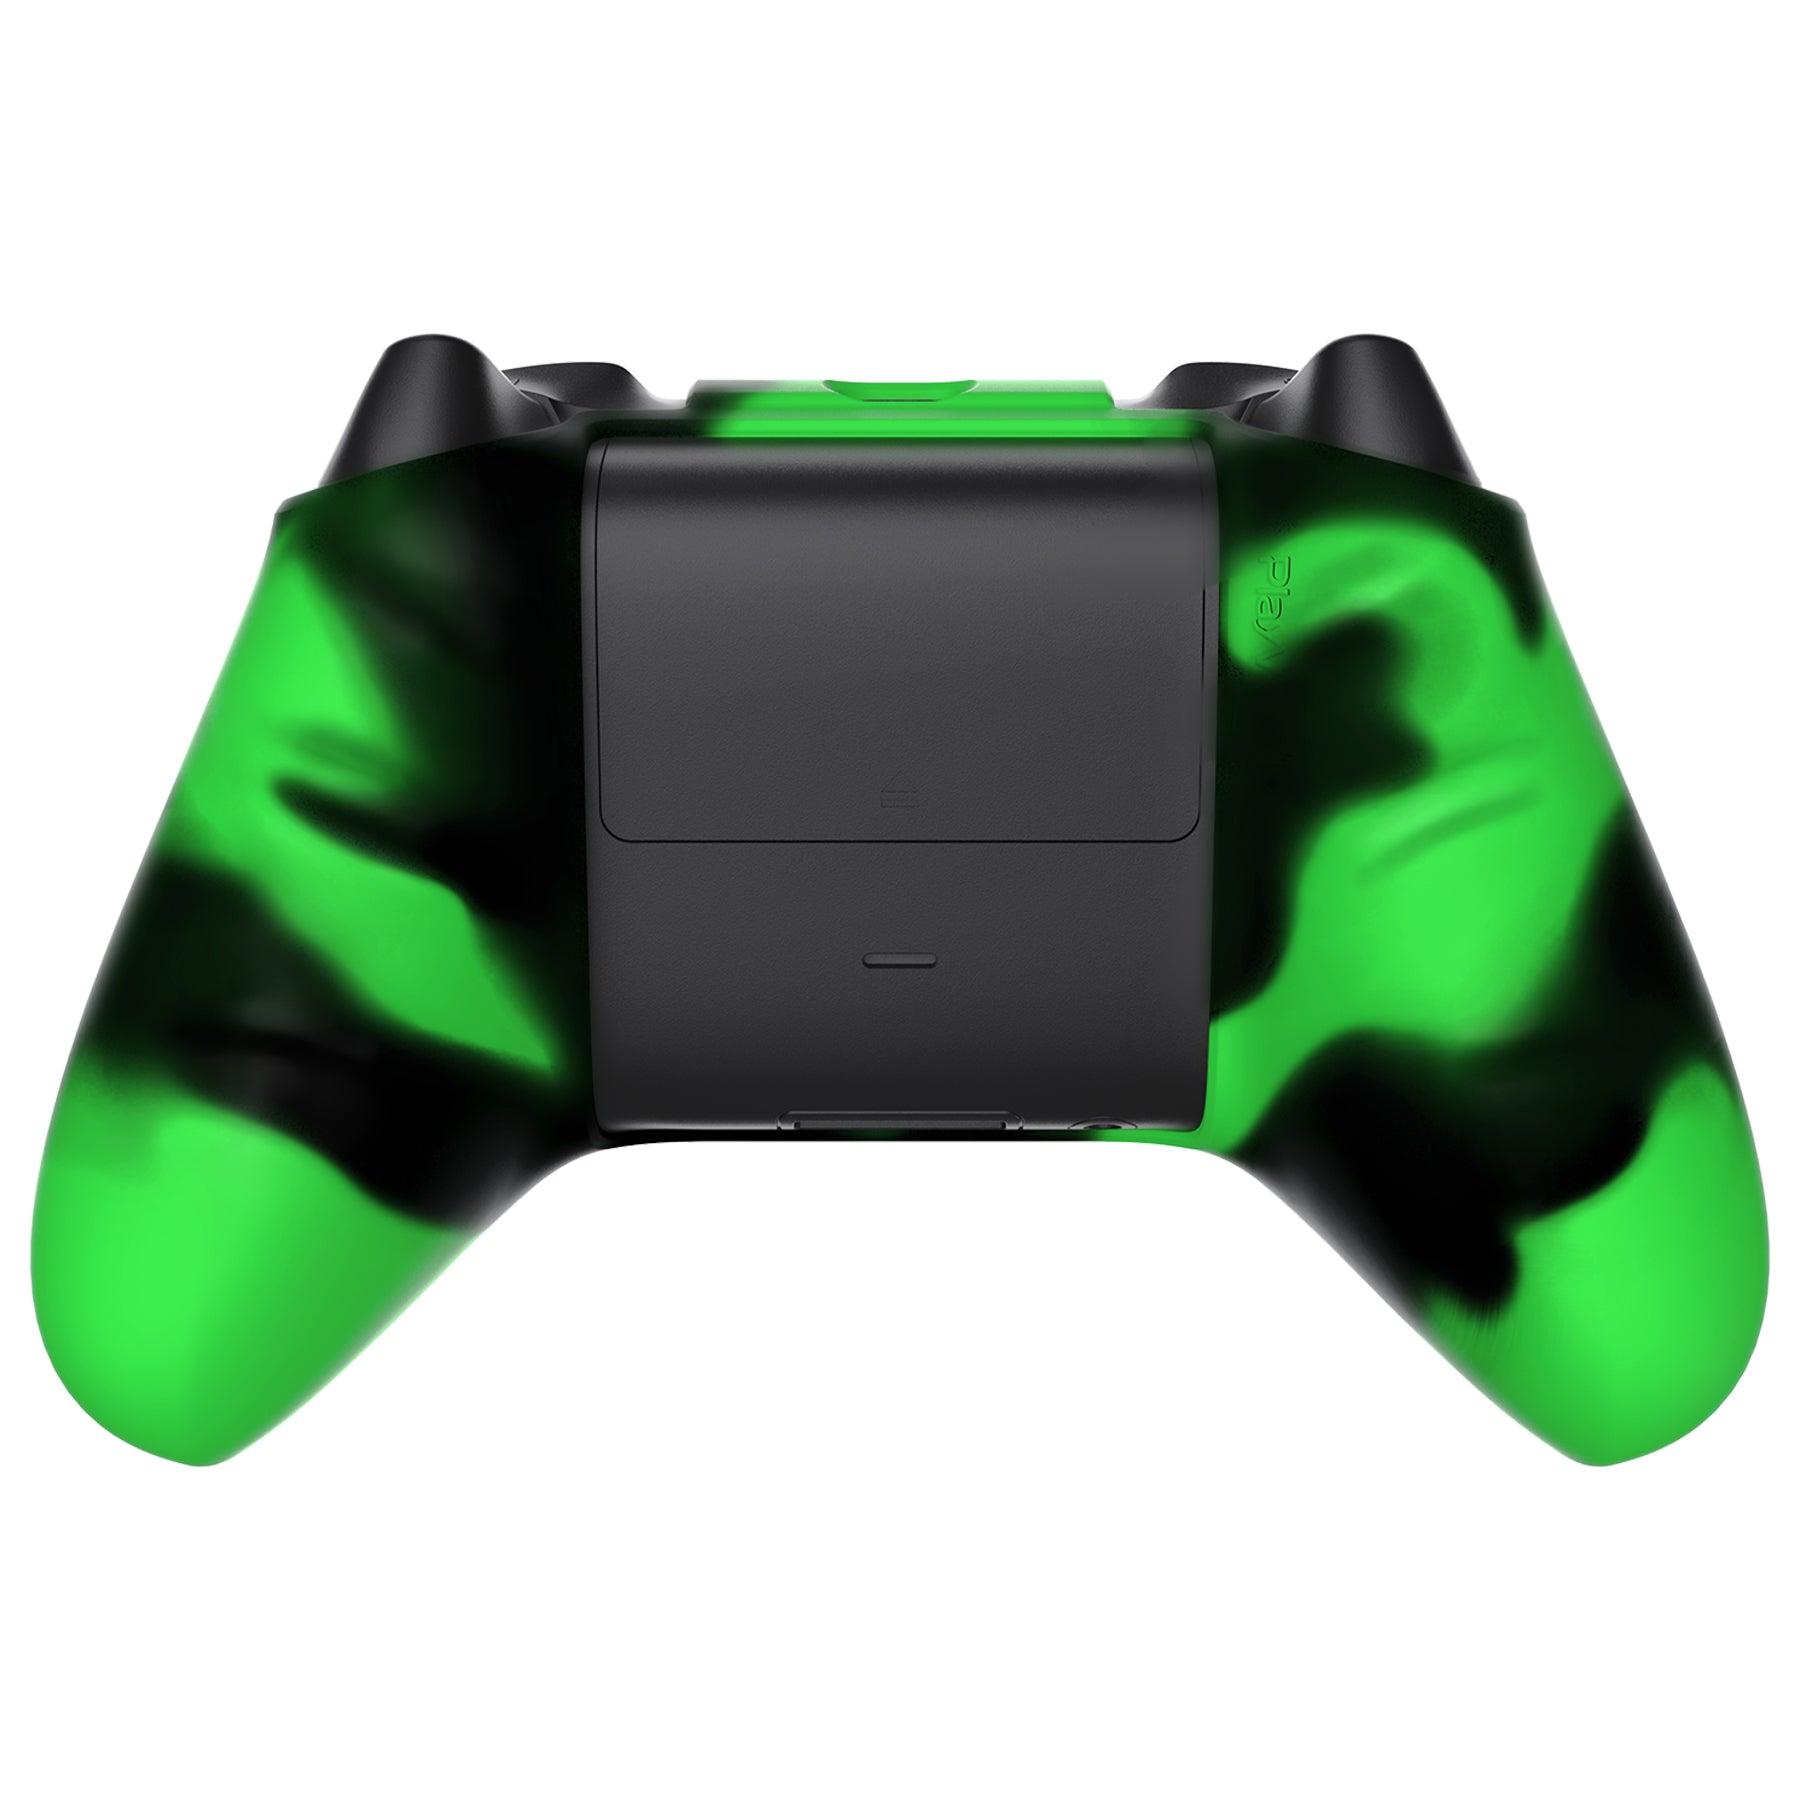 PlayVital Camouflage Soft Anti-Slip Silicone Cover for Xbox Series X Controller, Rubber Case Protector for Xbox Series S Controller with Black Thumb Grip Caps - Green & Black - BLX3023 PlayVital